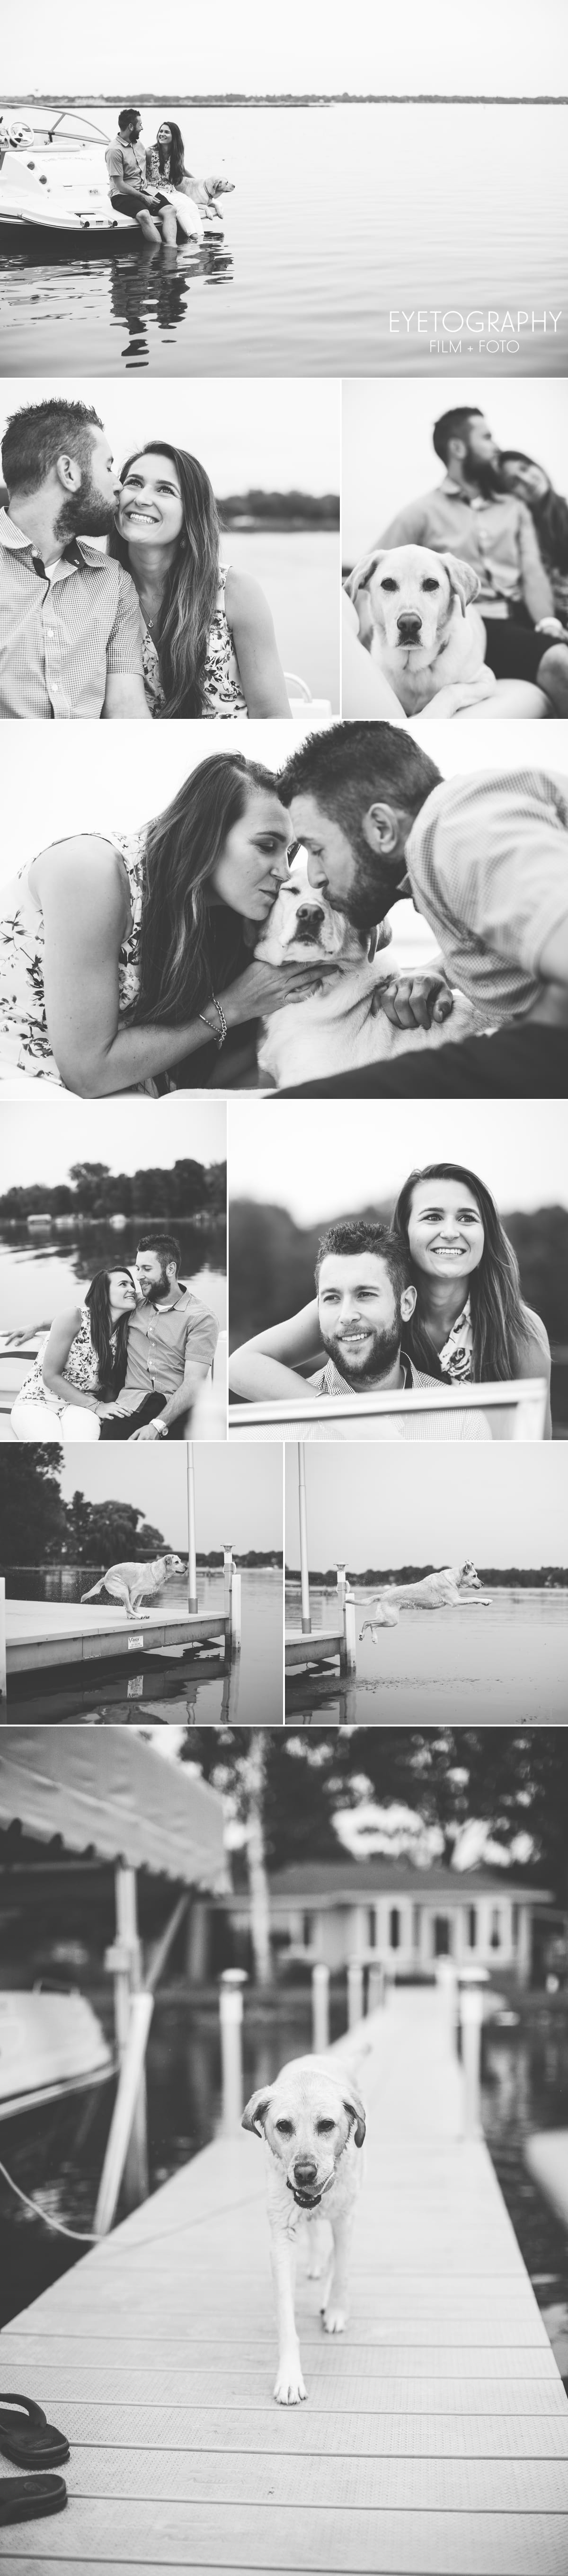 Engagement Session on a Lake | Andrea + Chris | Eyetography Film + Foto Minneapolis, MN 3